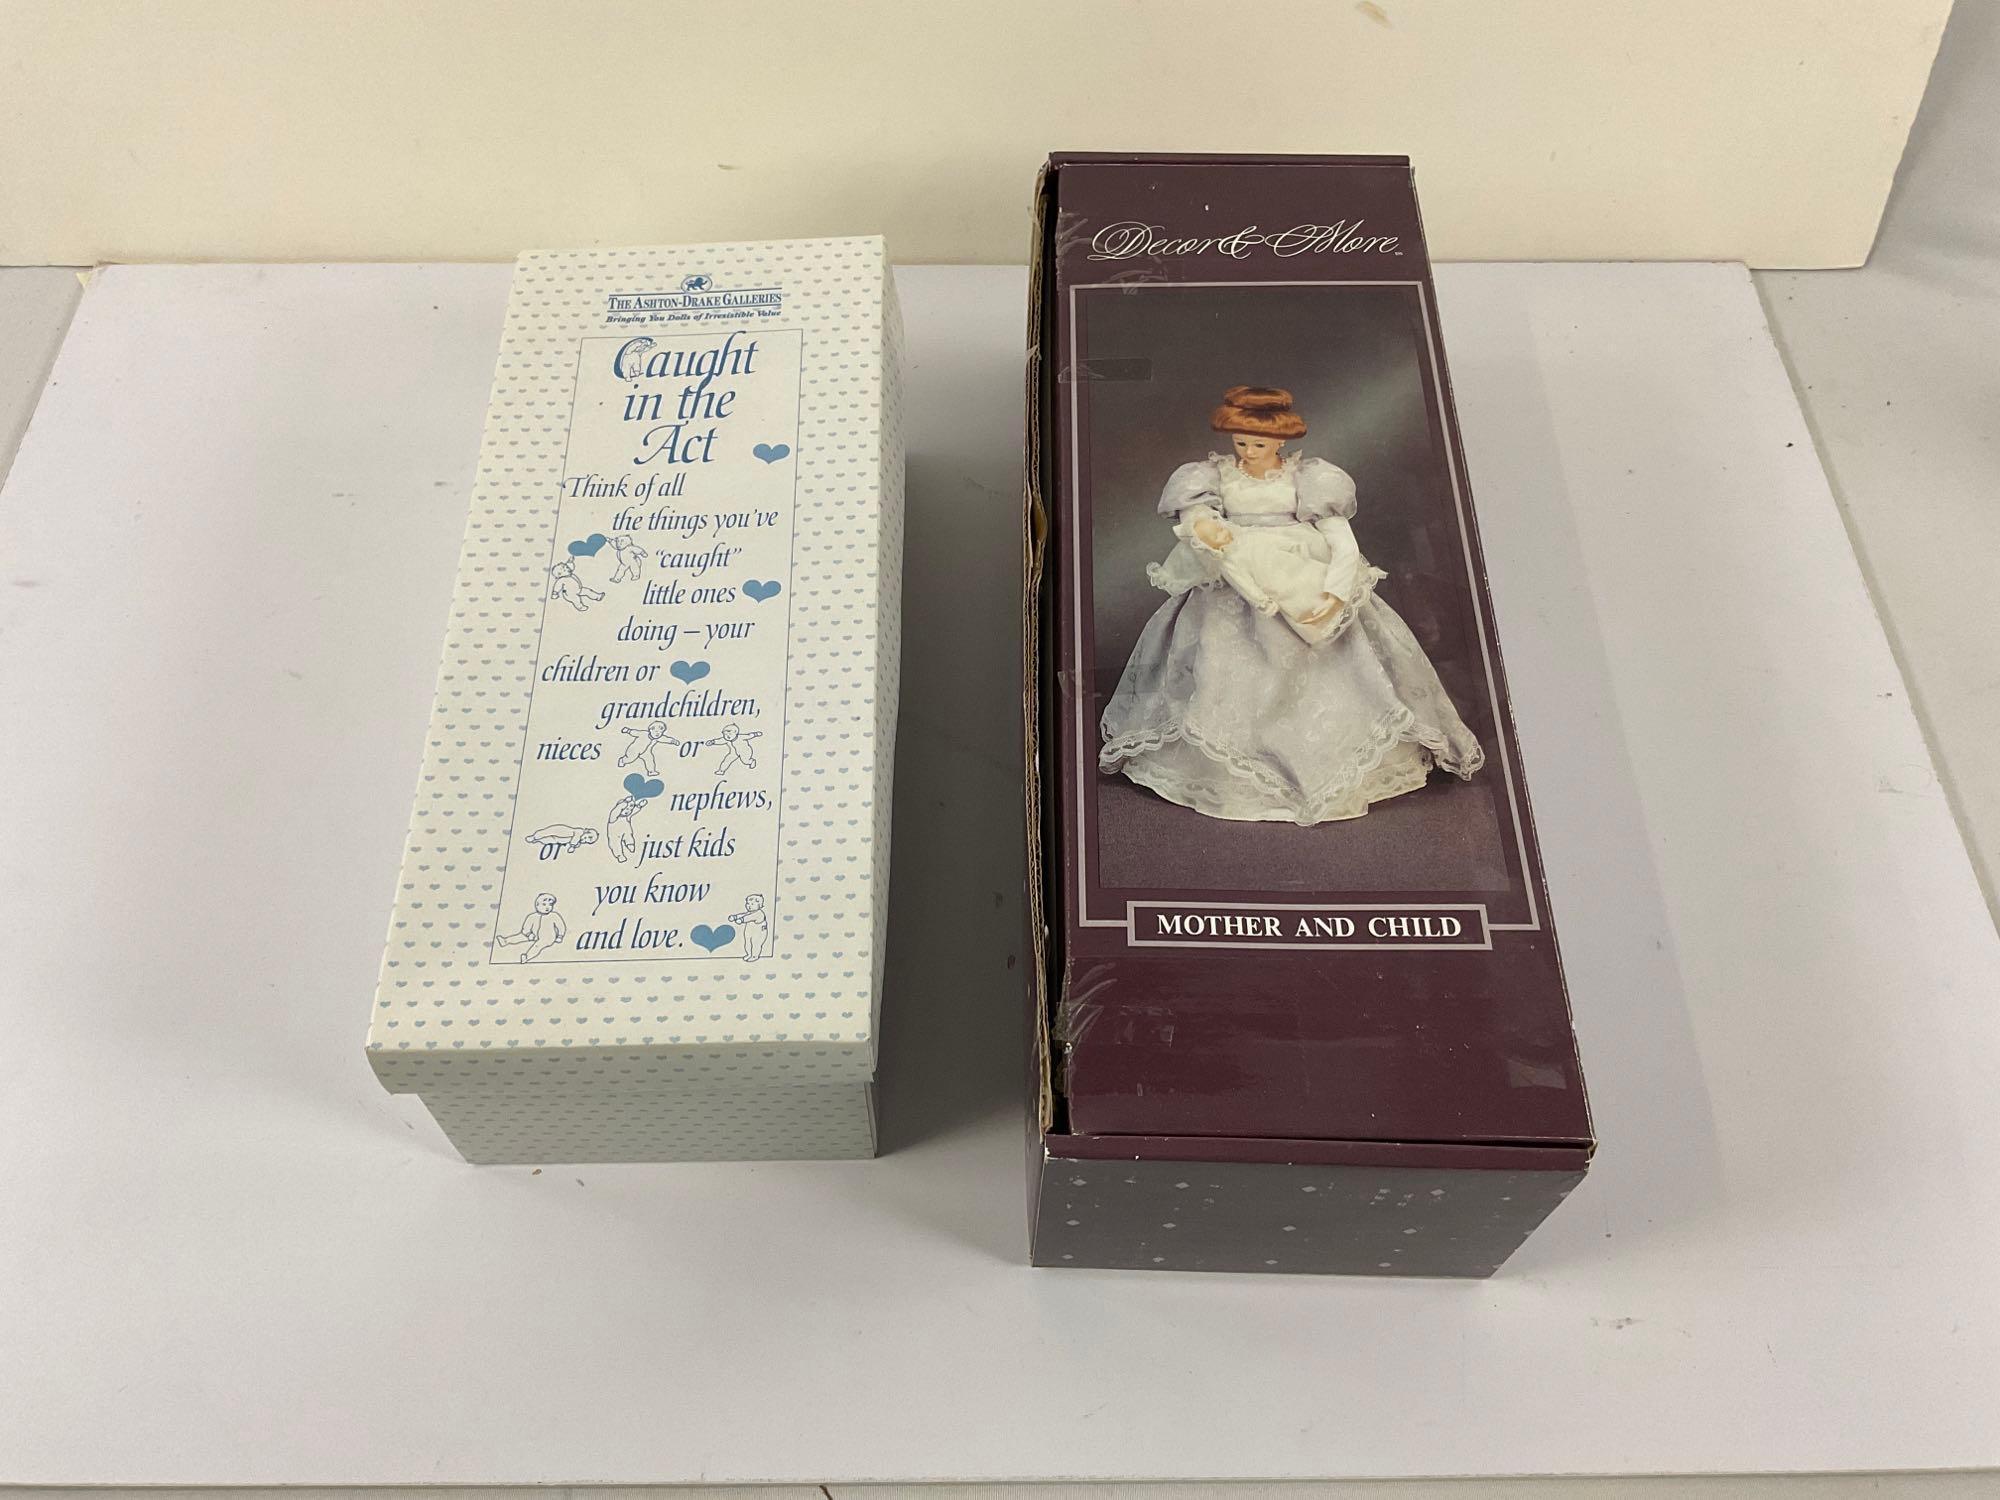 Ashton drake galleries vintage porcelain doll and decor and more "mother and child"